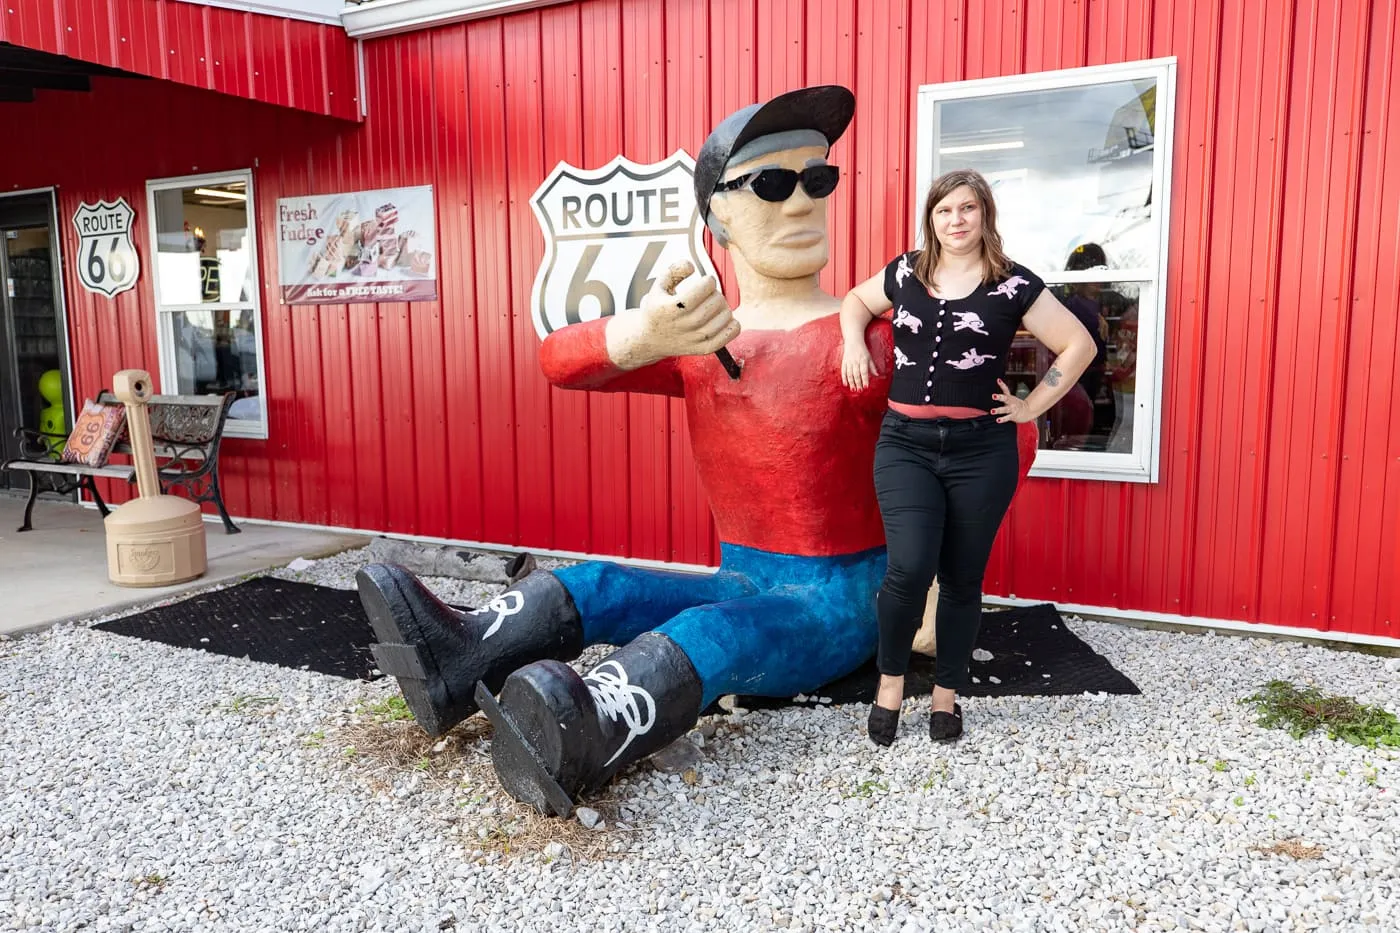 Fiberglass boy at the Pink Elephant Antique Mall in Livingston, Illinois - Route 66 Roadside Attraction